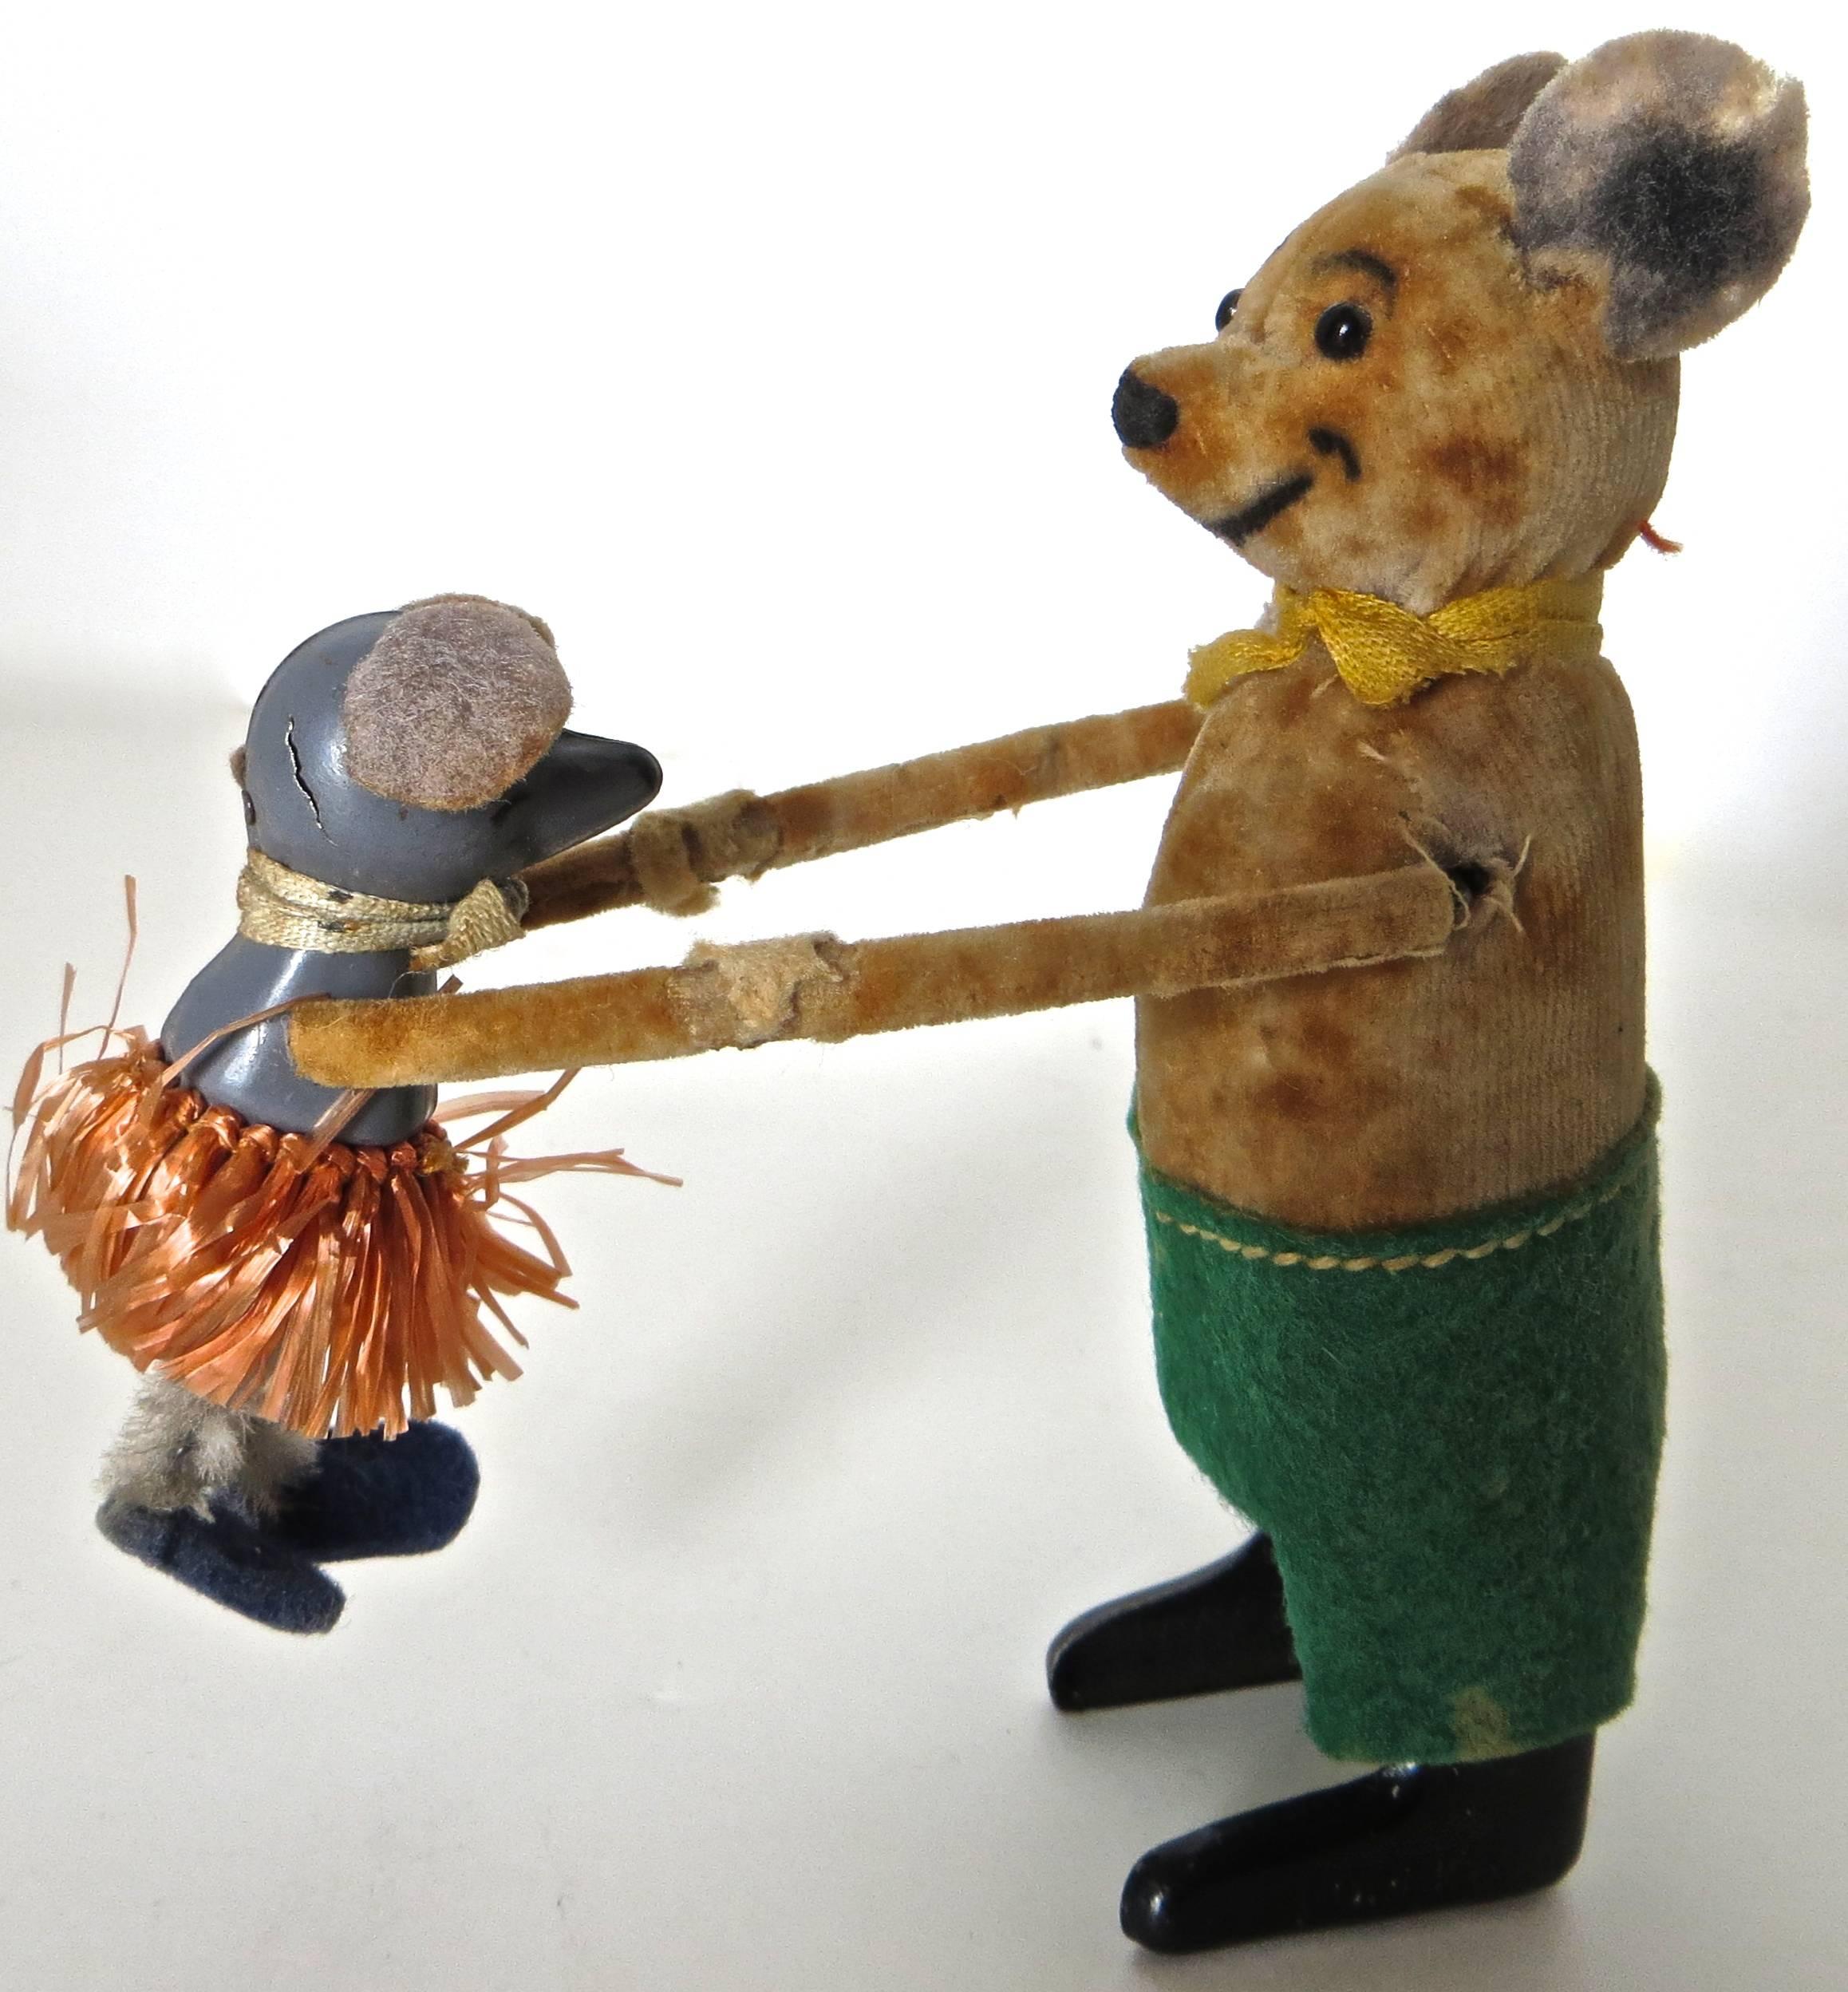 One of the most amusing of the Schuco clockwork toys, this rare windup toy, when wound, starts the bear dancing with his partner, the baby mouse. He spins around dancing in both directions while at the same time raising the mouse up and down. It is